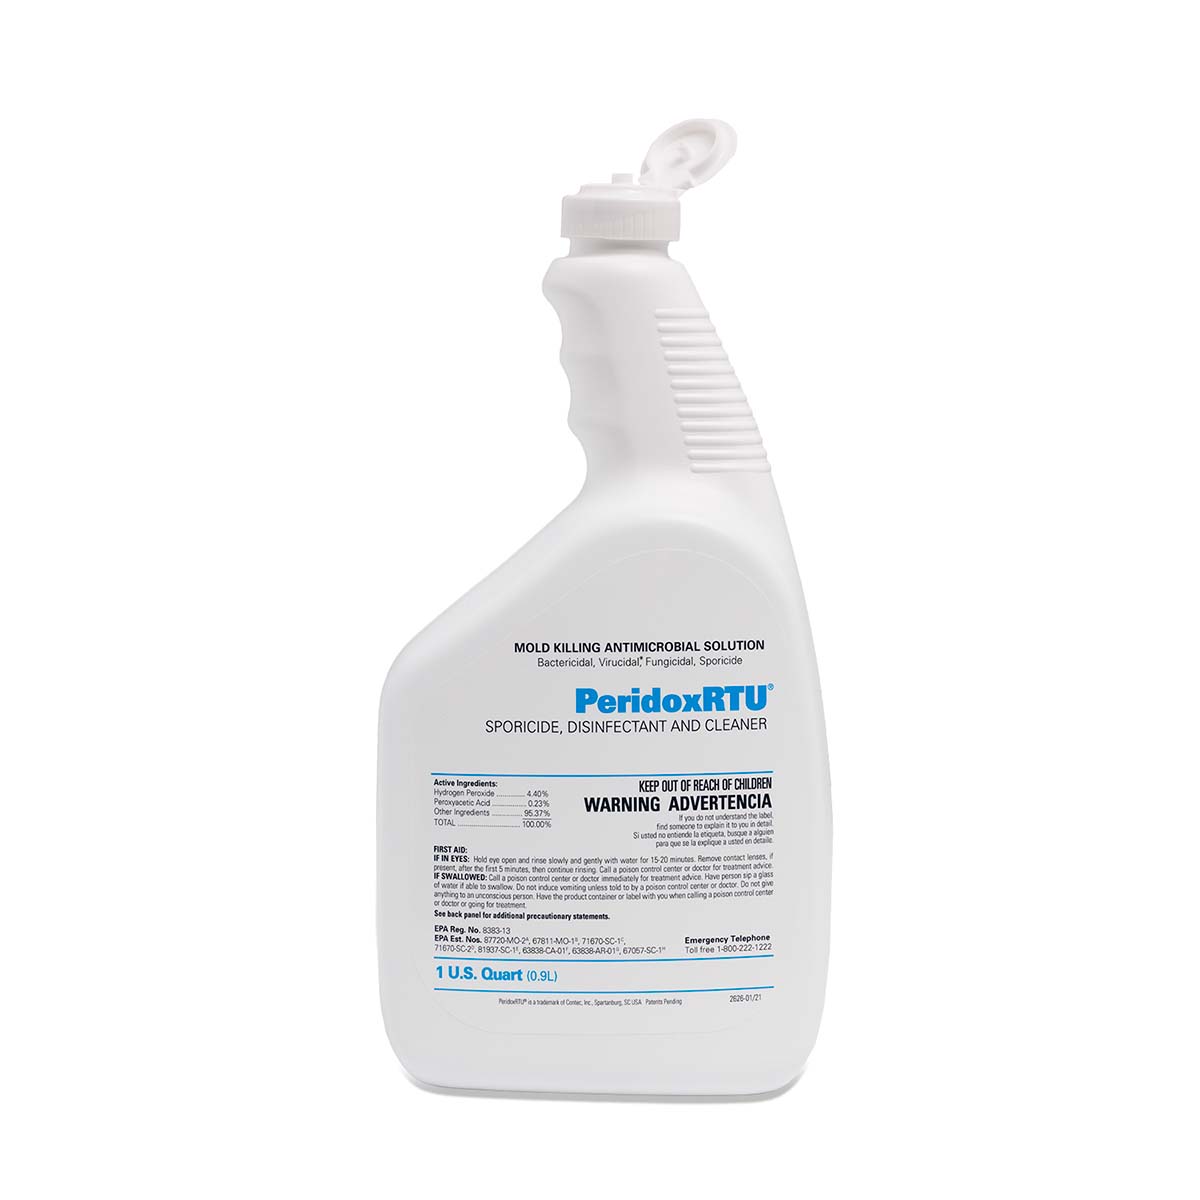 PeridoxRTU Sporicidal Disinfectant and Cleaner-3